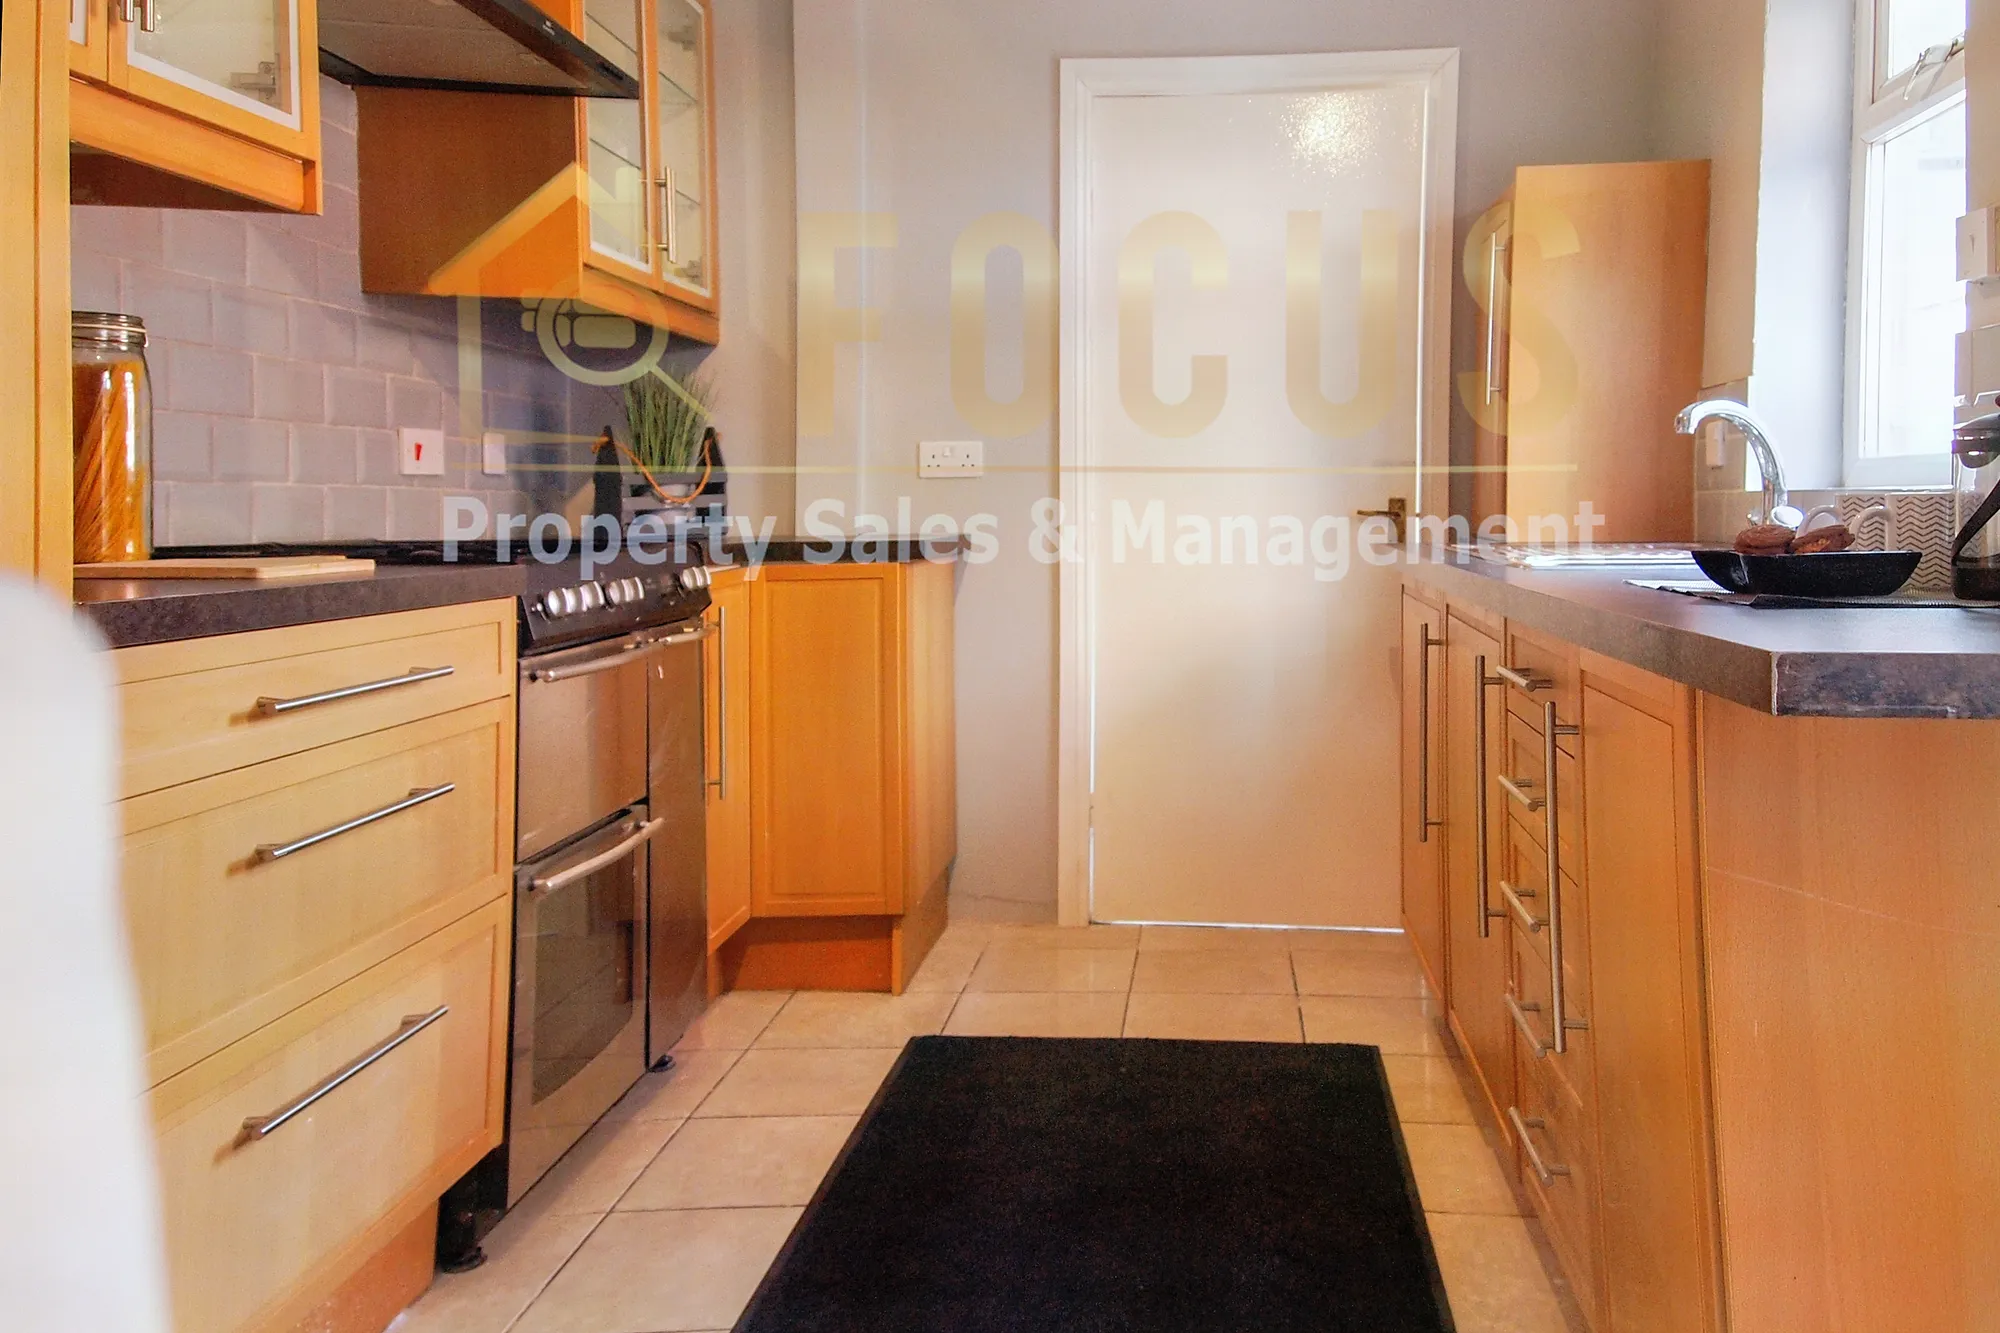 5 bed mid-terraced house to rent in Kimberley Road, Leicester  - Property Image 2